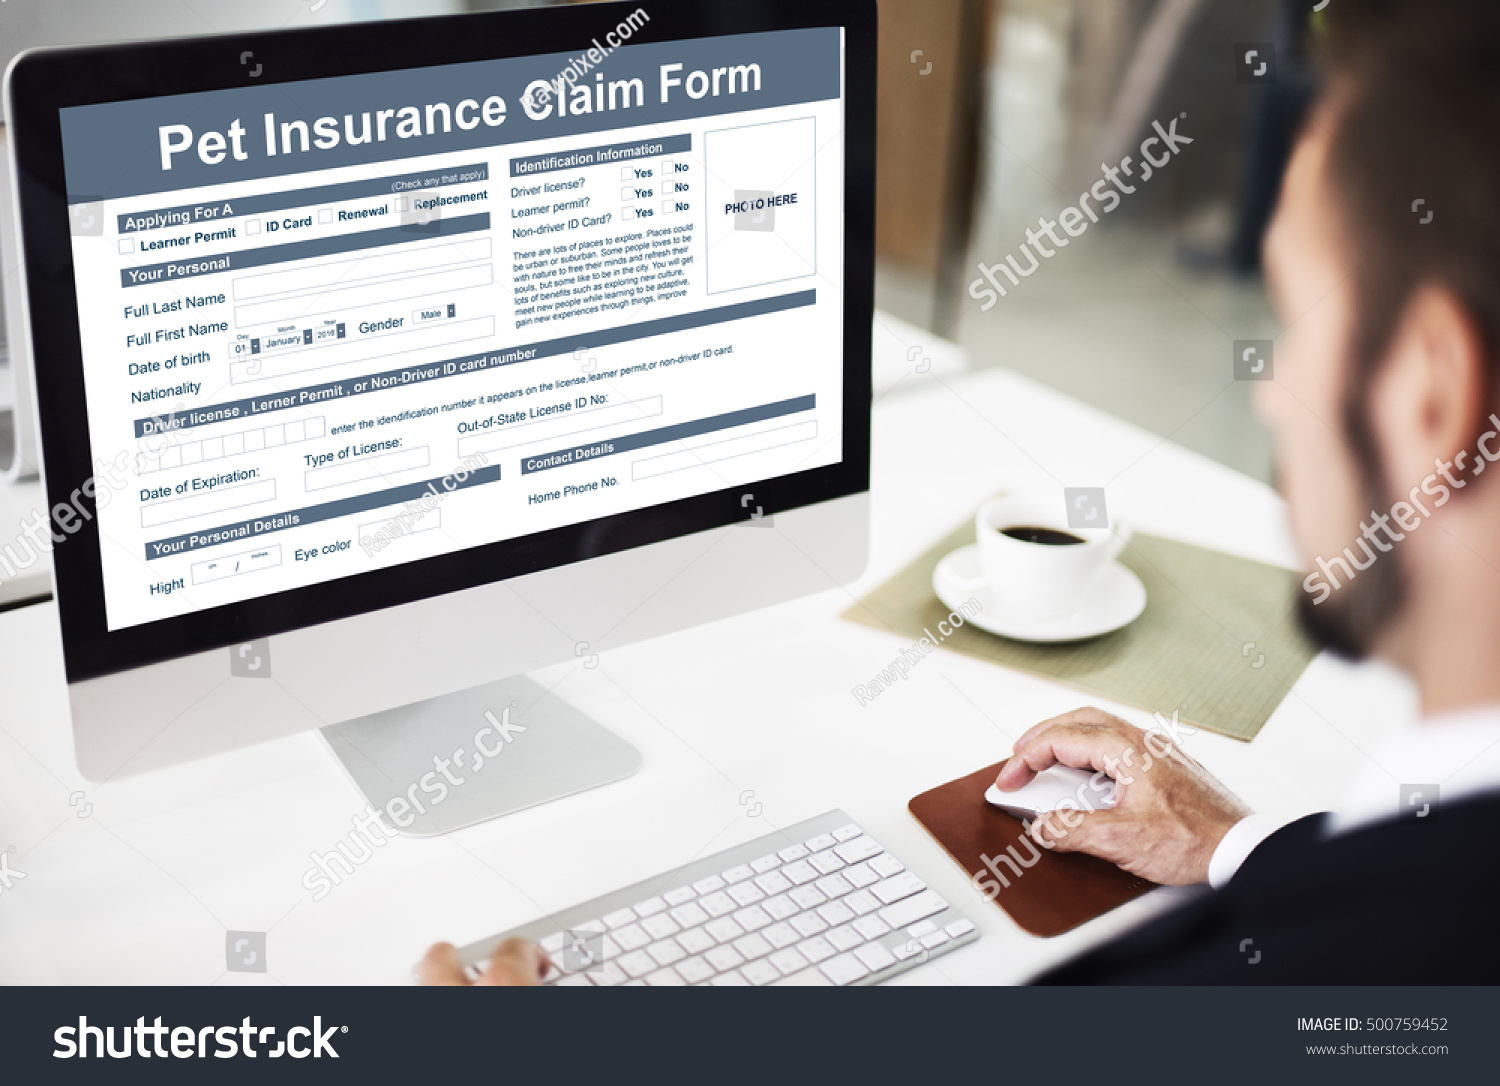 Pet Insurance Claim Form Protection Safety Stock Photo Edit Now 500759452